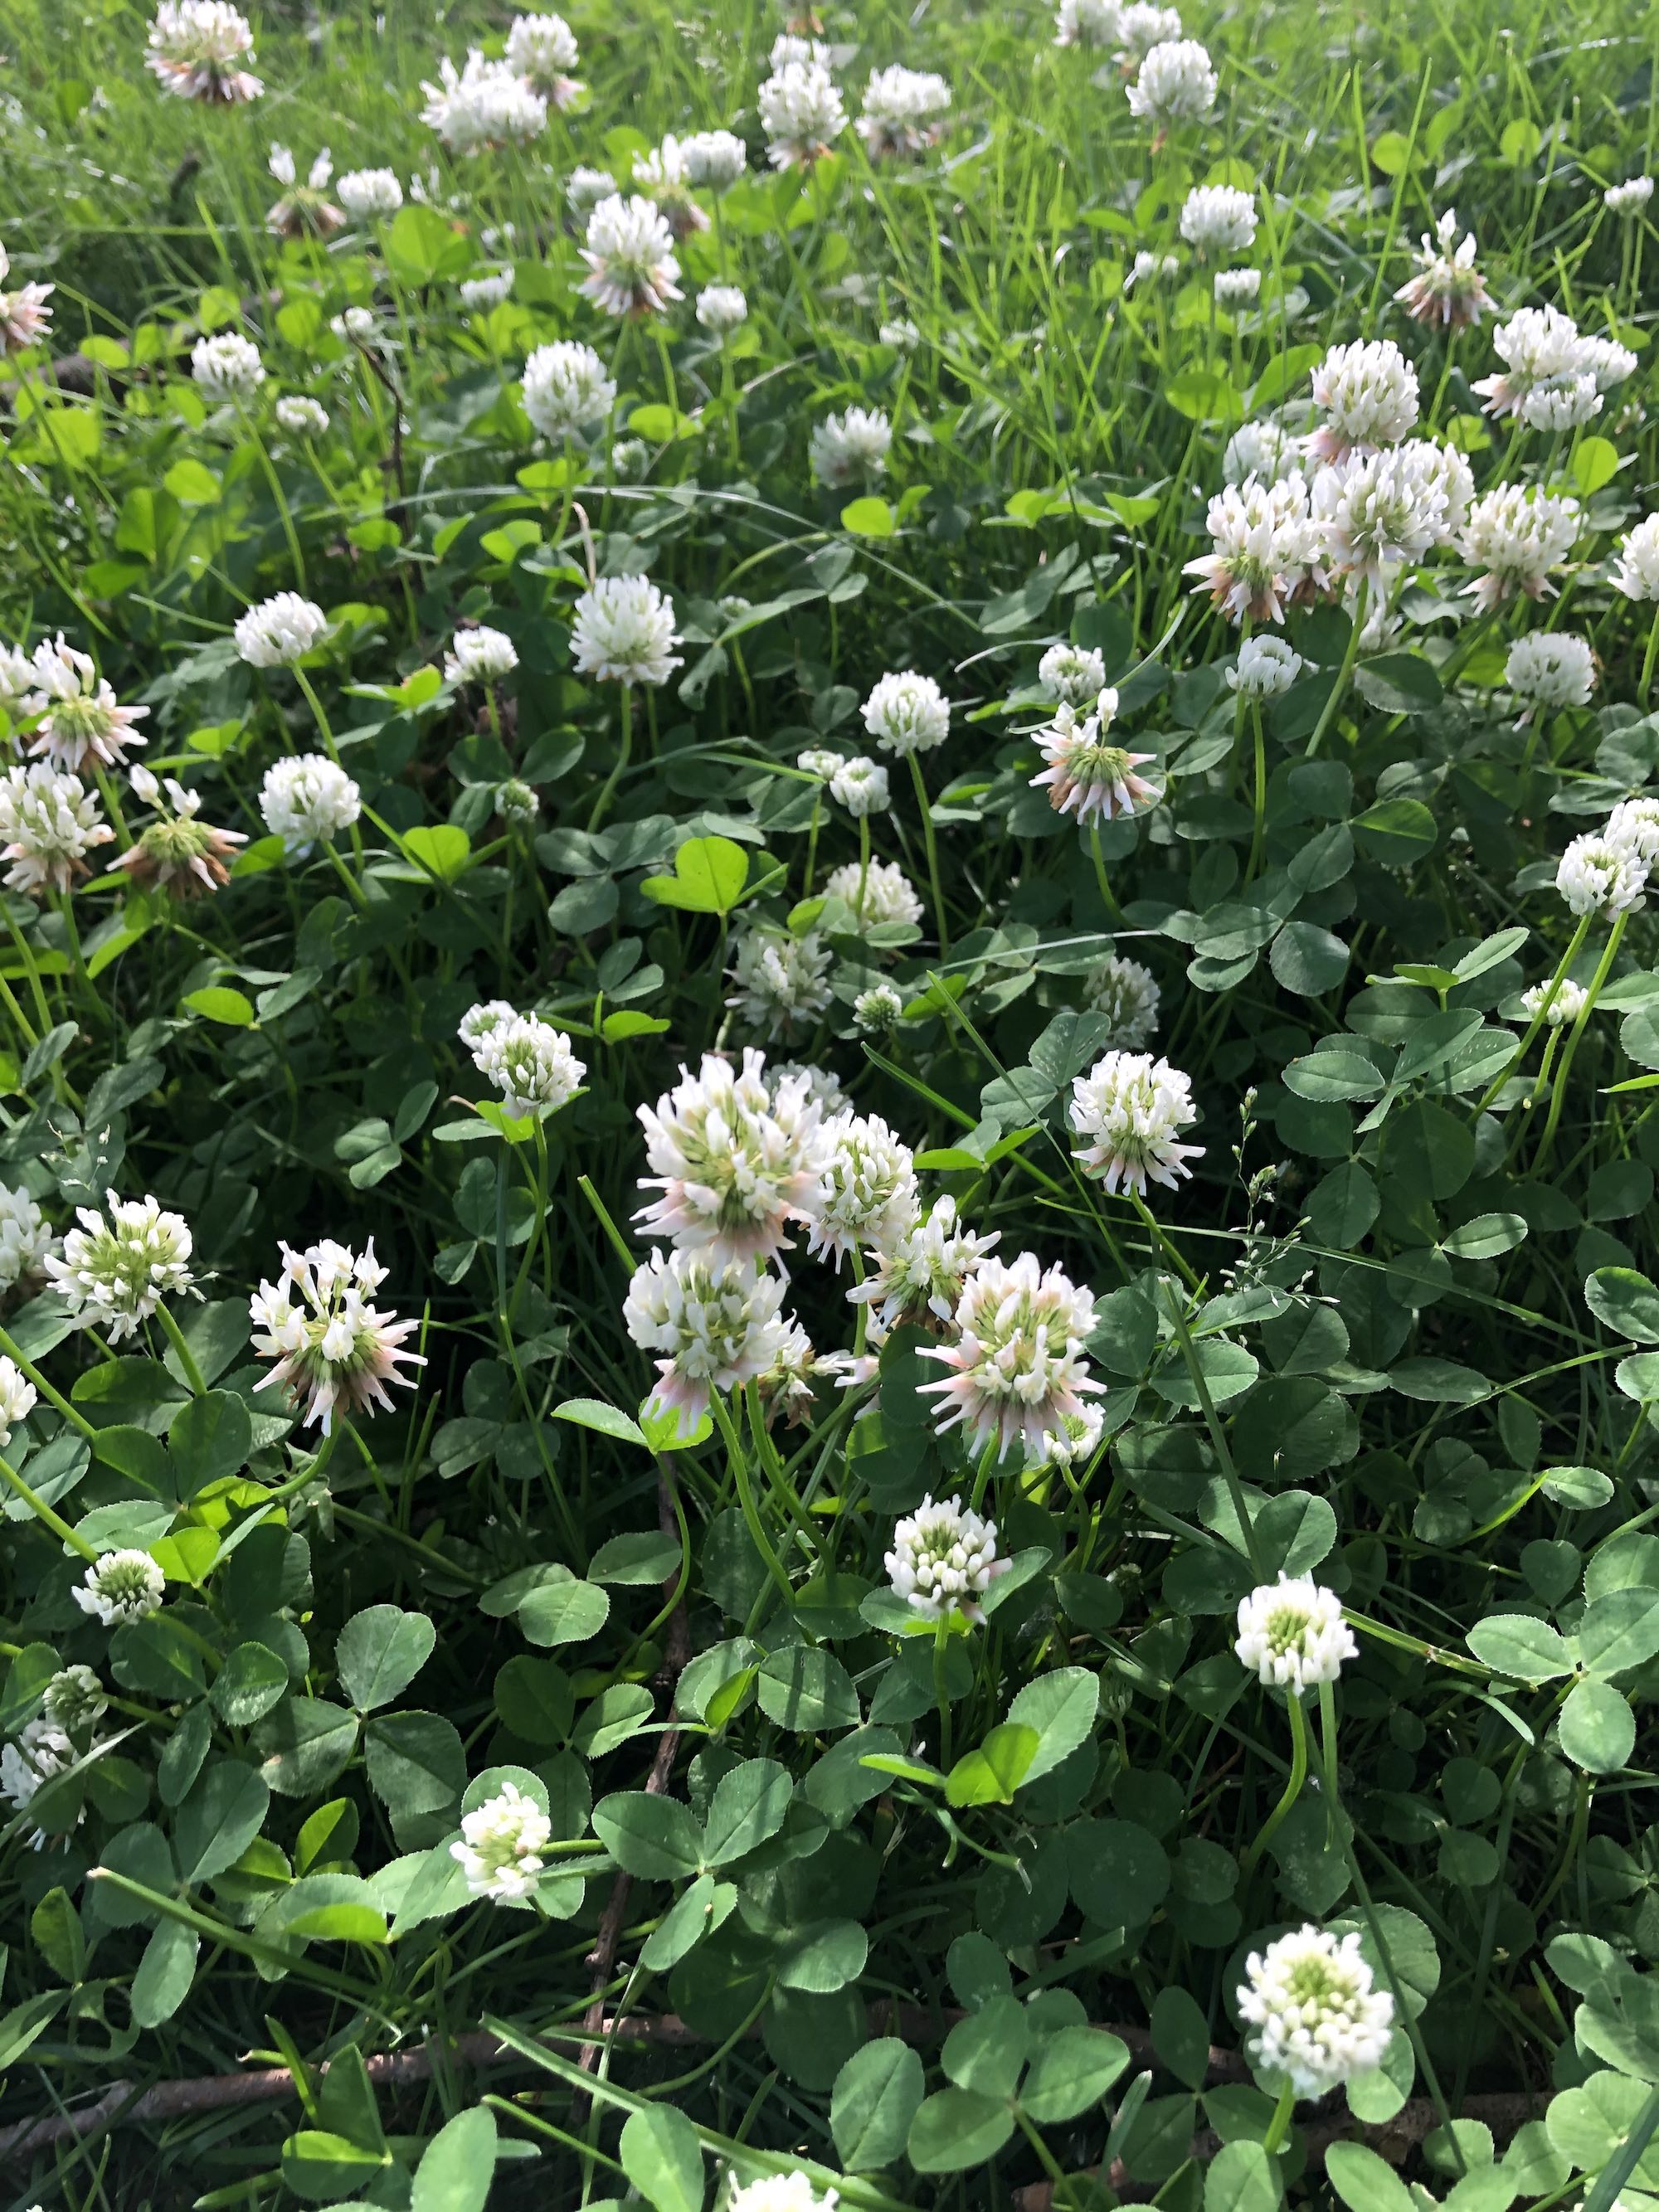 White Clover off of Manitou Way sidewalk in Madison, Wisconsin on June 19, 2020.